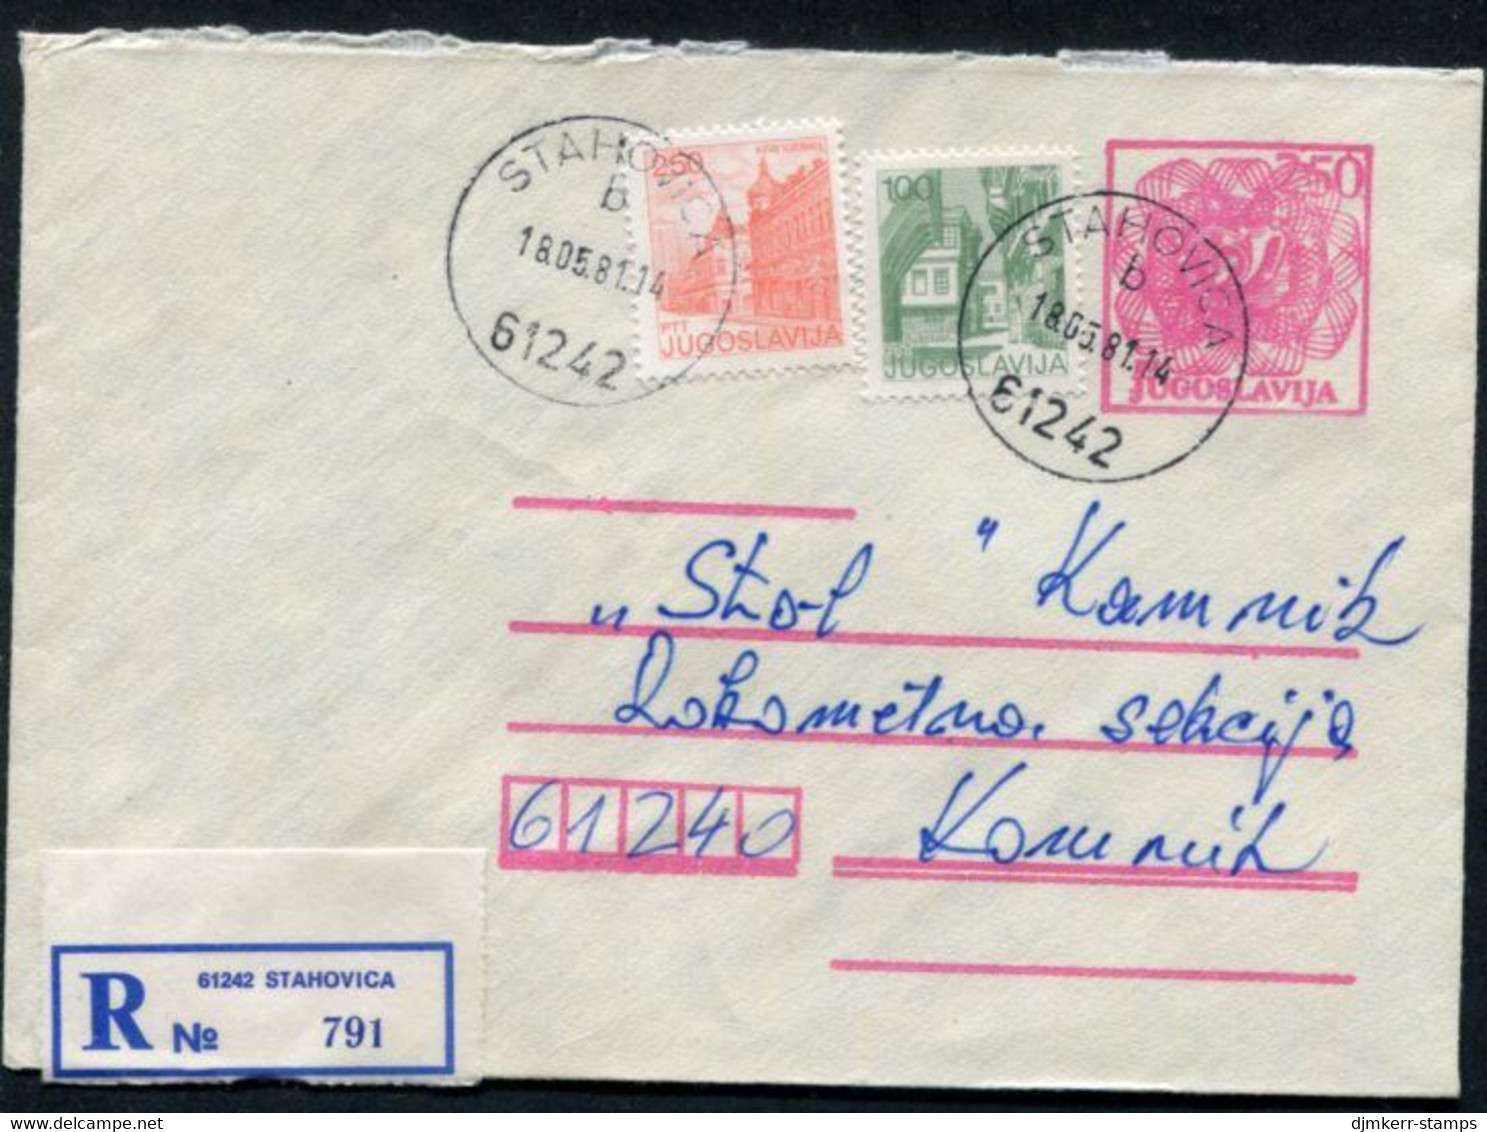 YUGOSLAVIA 1980 2,50 D. Postal Stationery Envelope Registered With Additional Stamps.  Michel U88 7II - Entiers Postaux